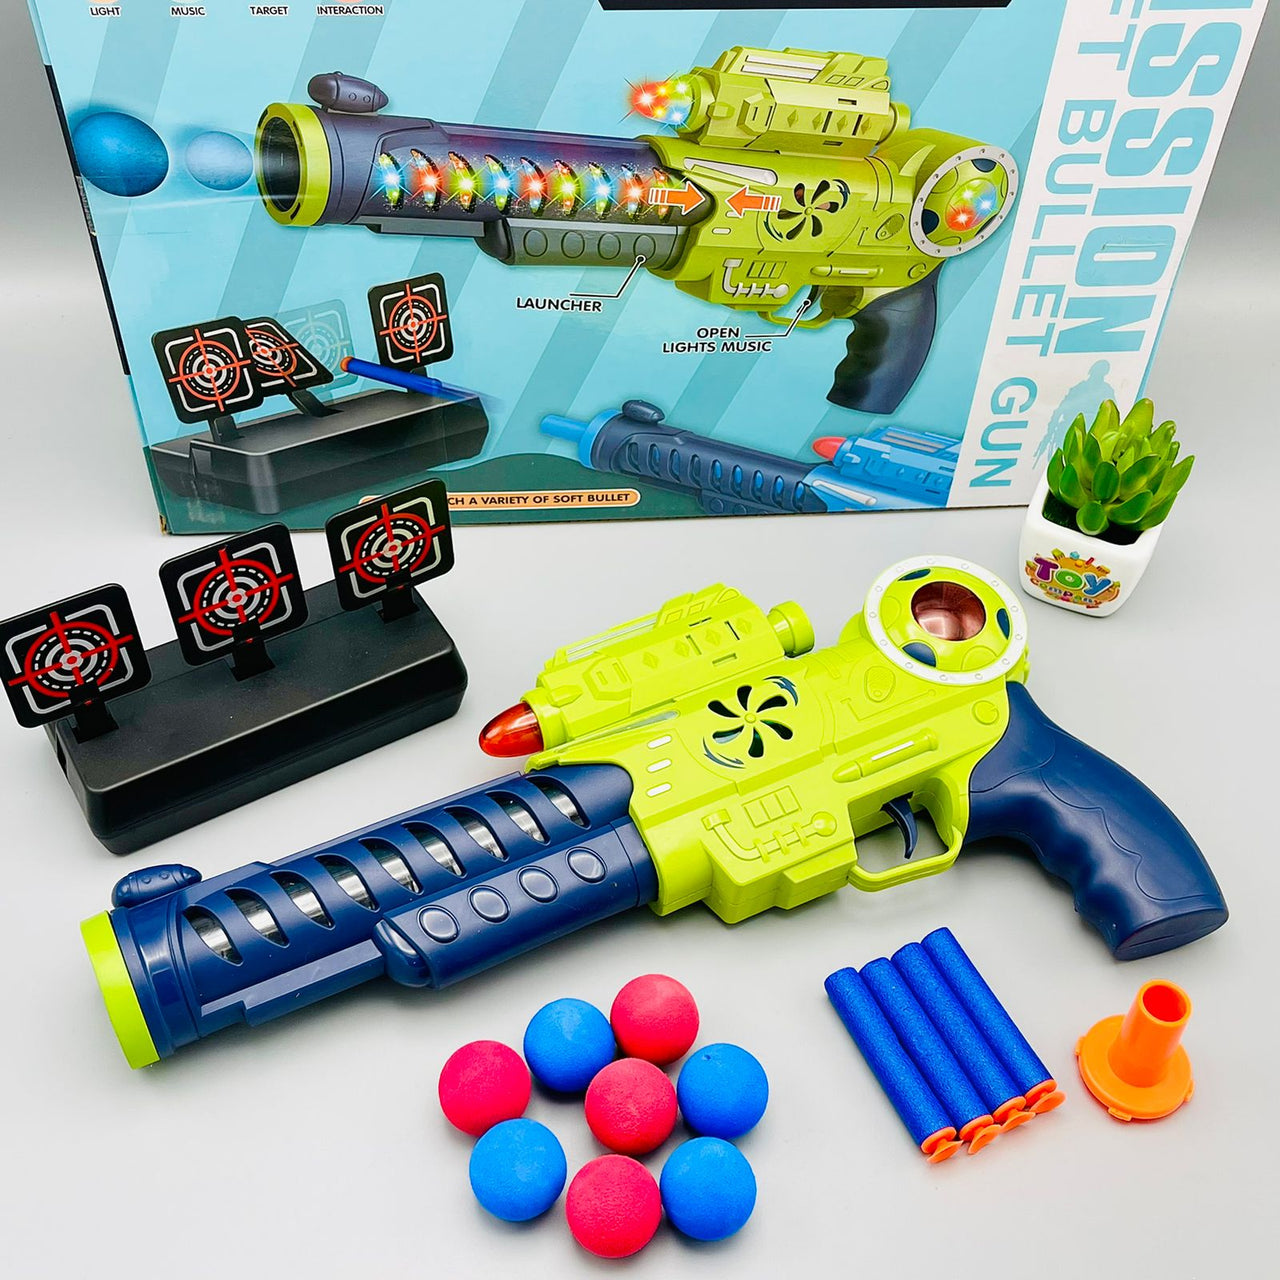 Space Air Soft Bullet Gun Toy with Target